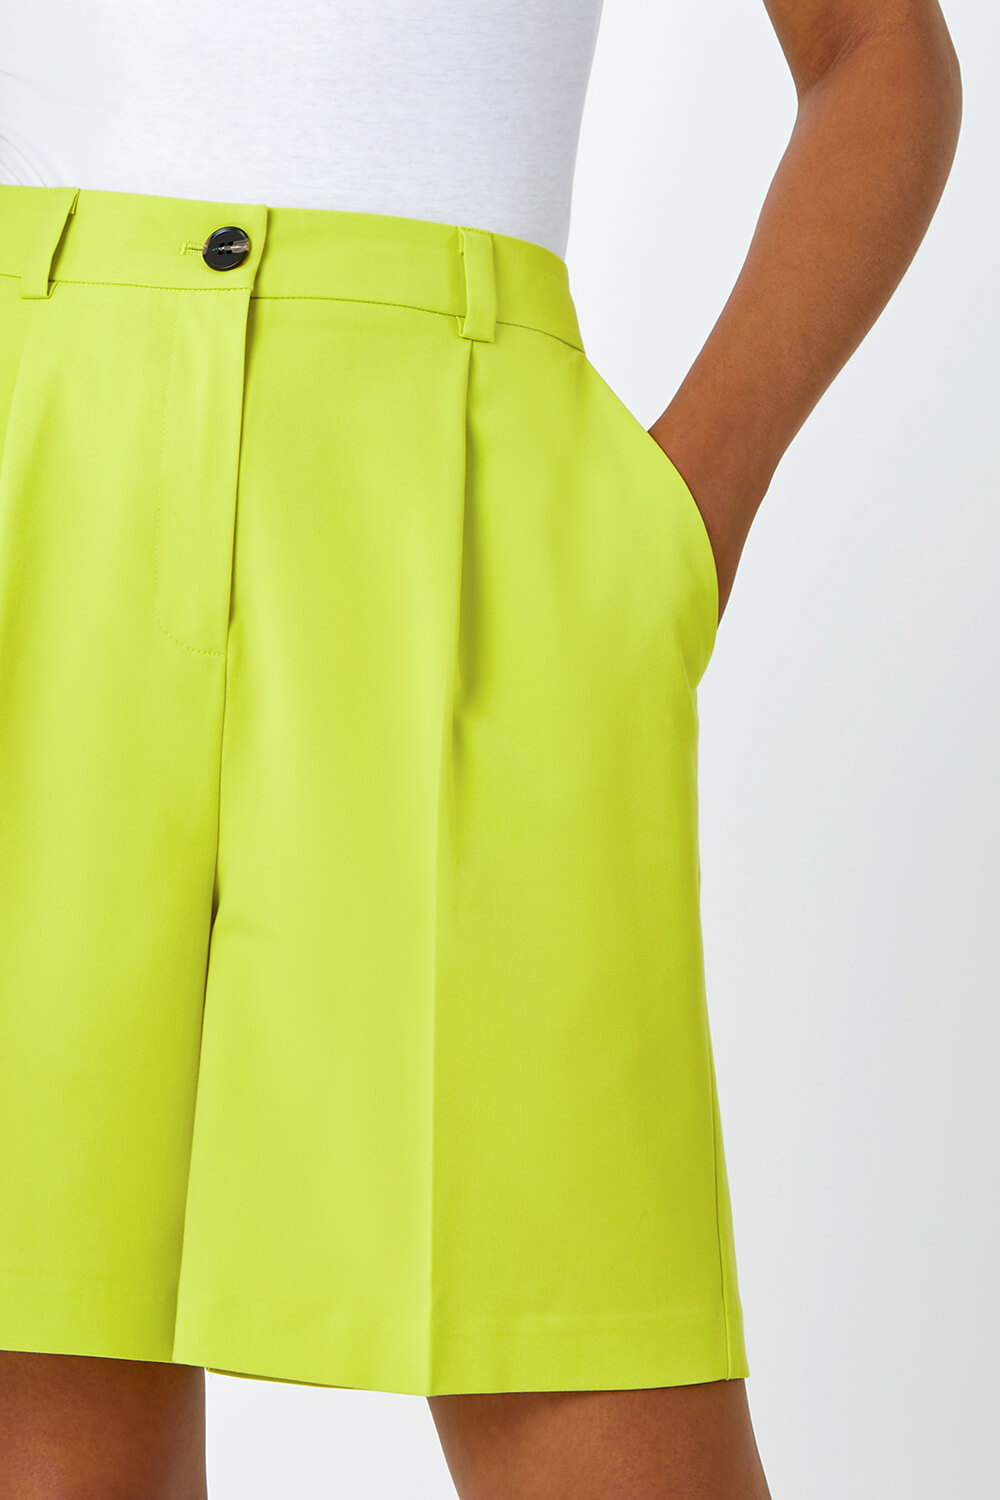 Lime Tailored Stretch Shorts, Image 5 of 5